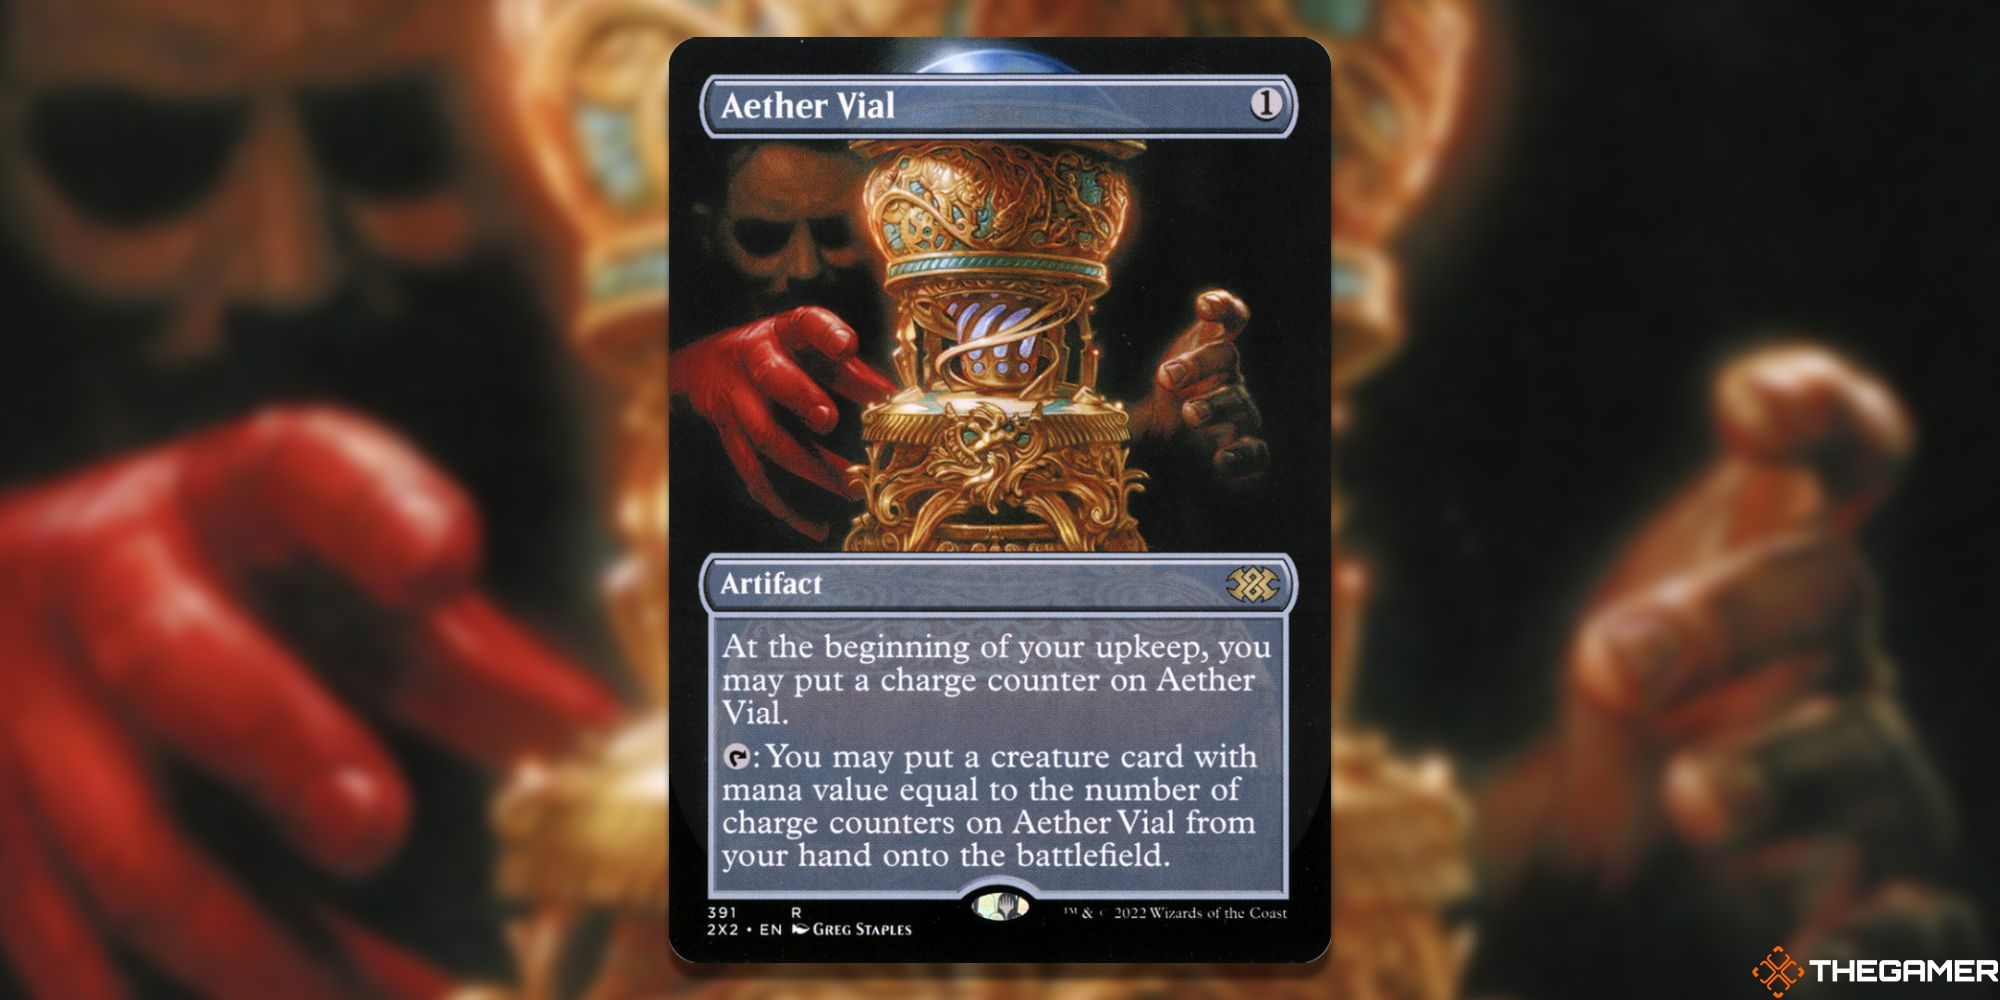 The card Aether Vial from Magic: The Gathering.